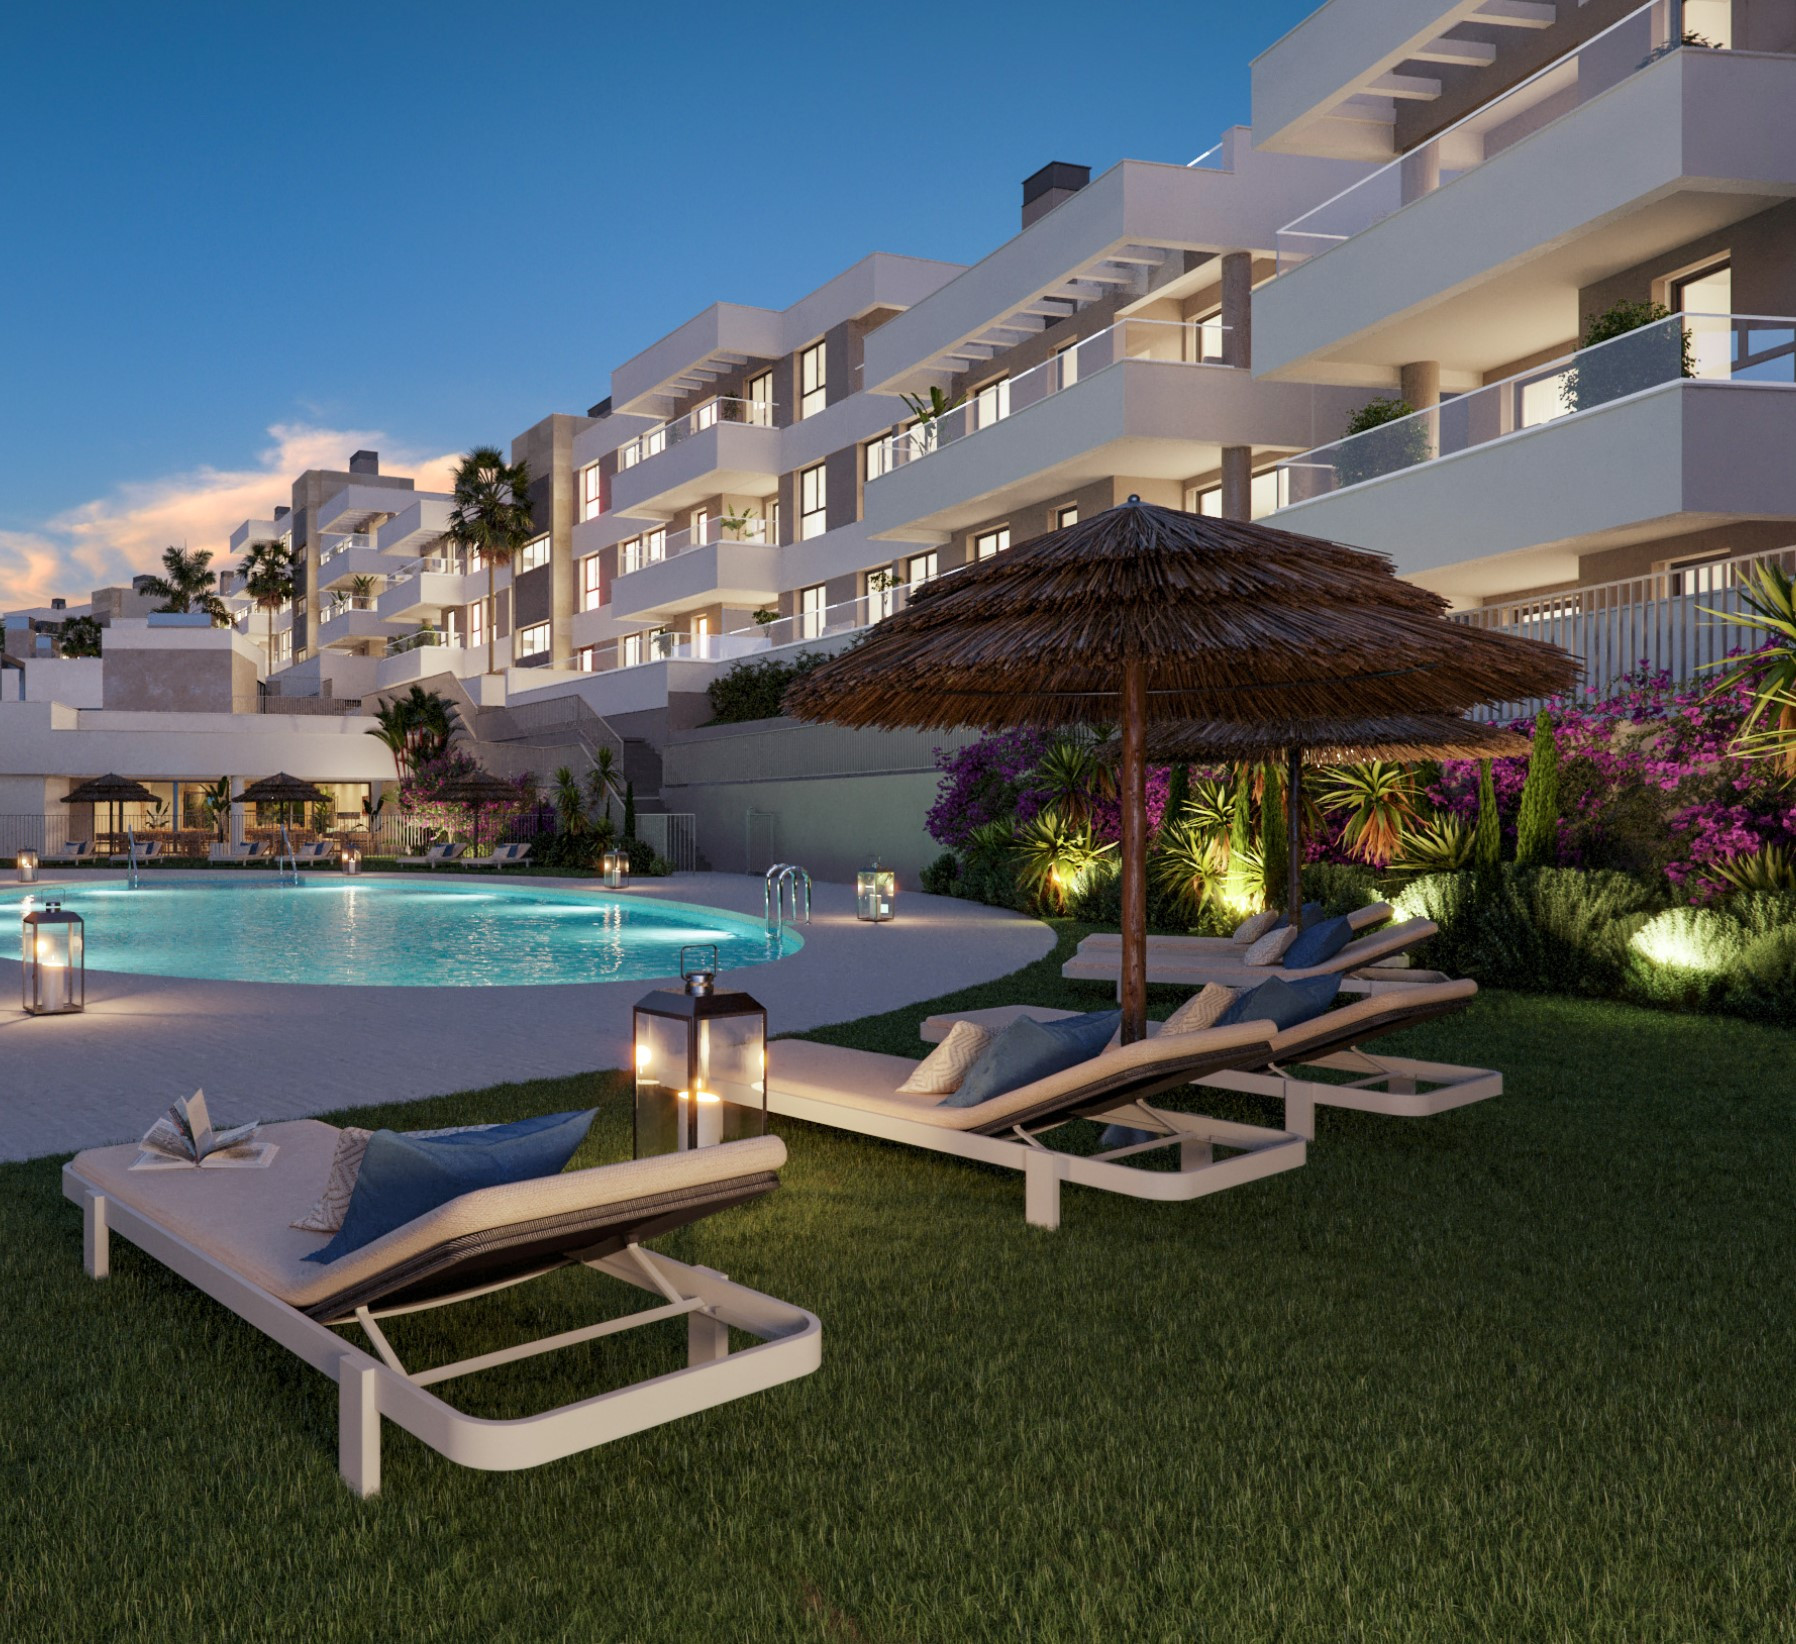 Scala: New residential complex with 1 to 4 bedroom homes located in Estepona.